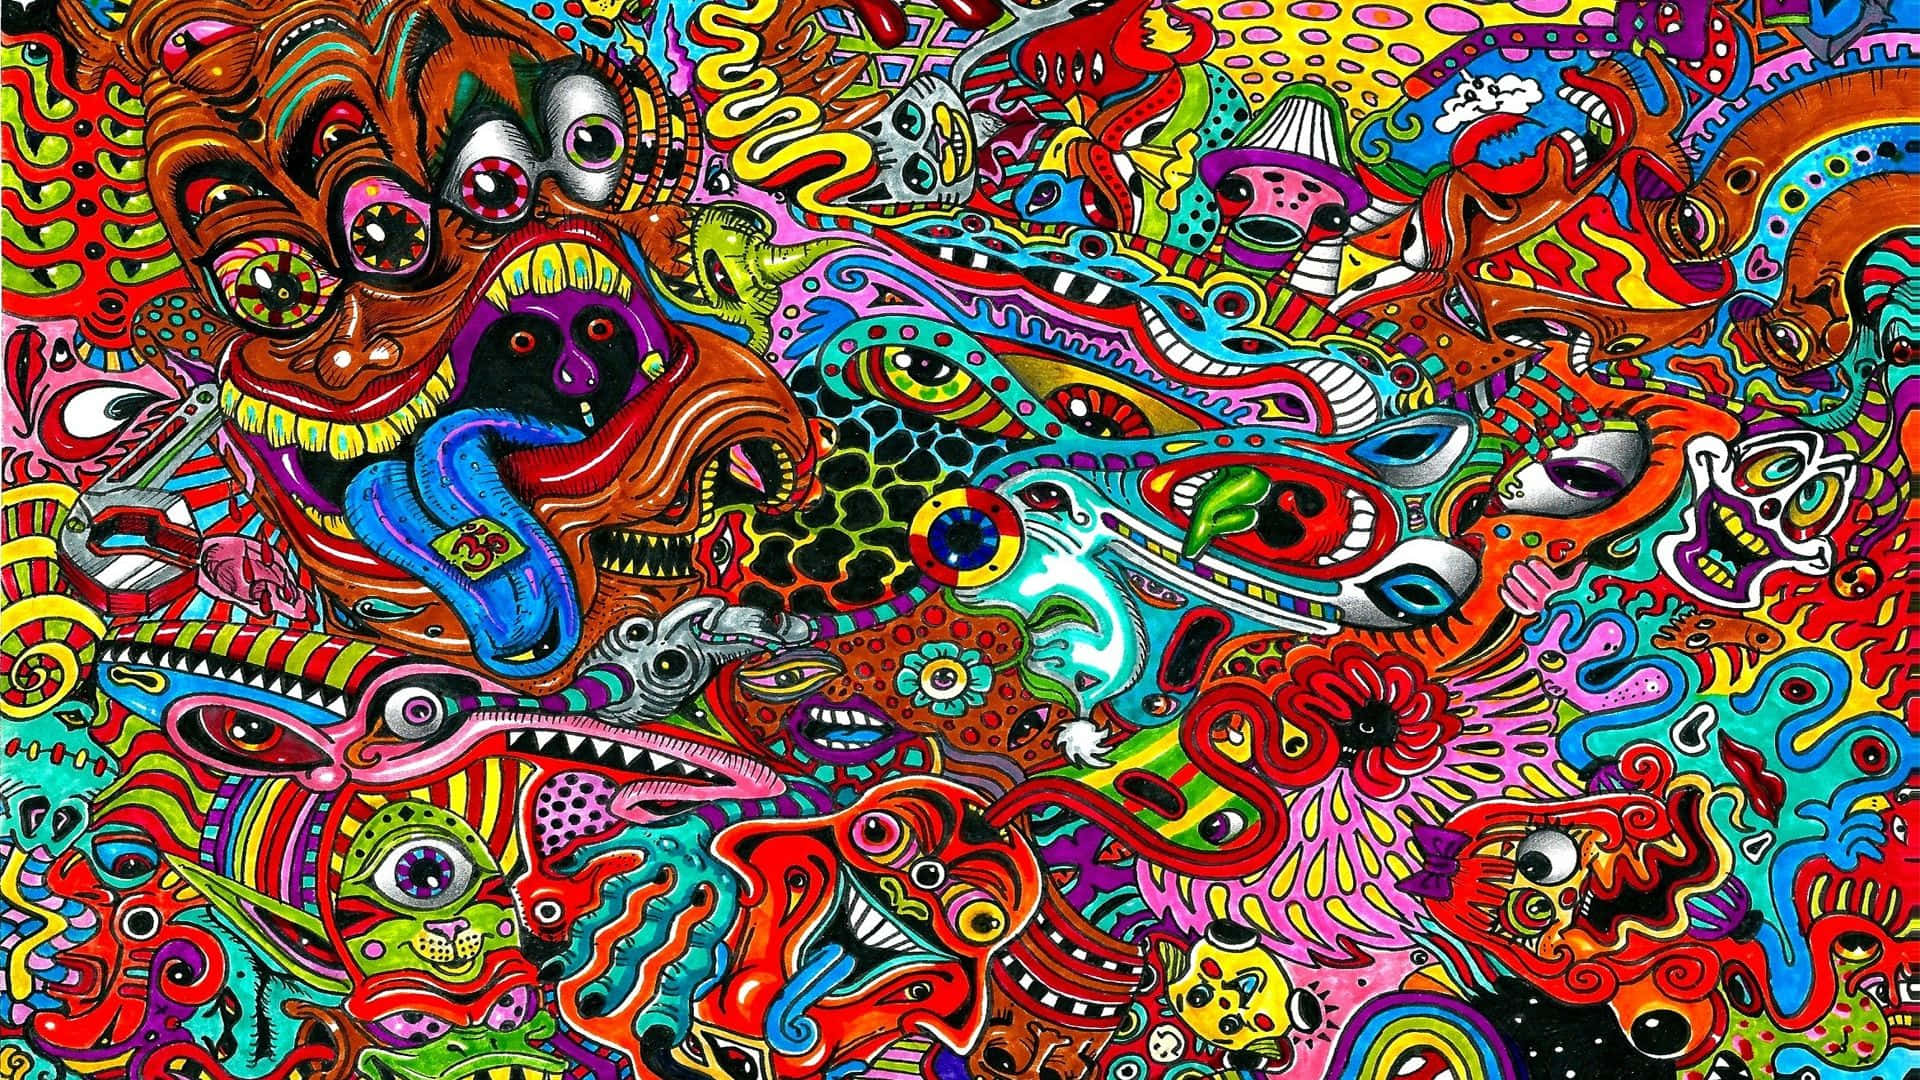 A Colorful Psychedelic Art Print With Many Different Colors Wallpaper